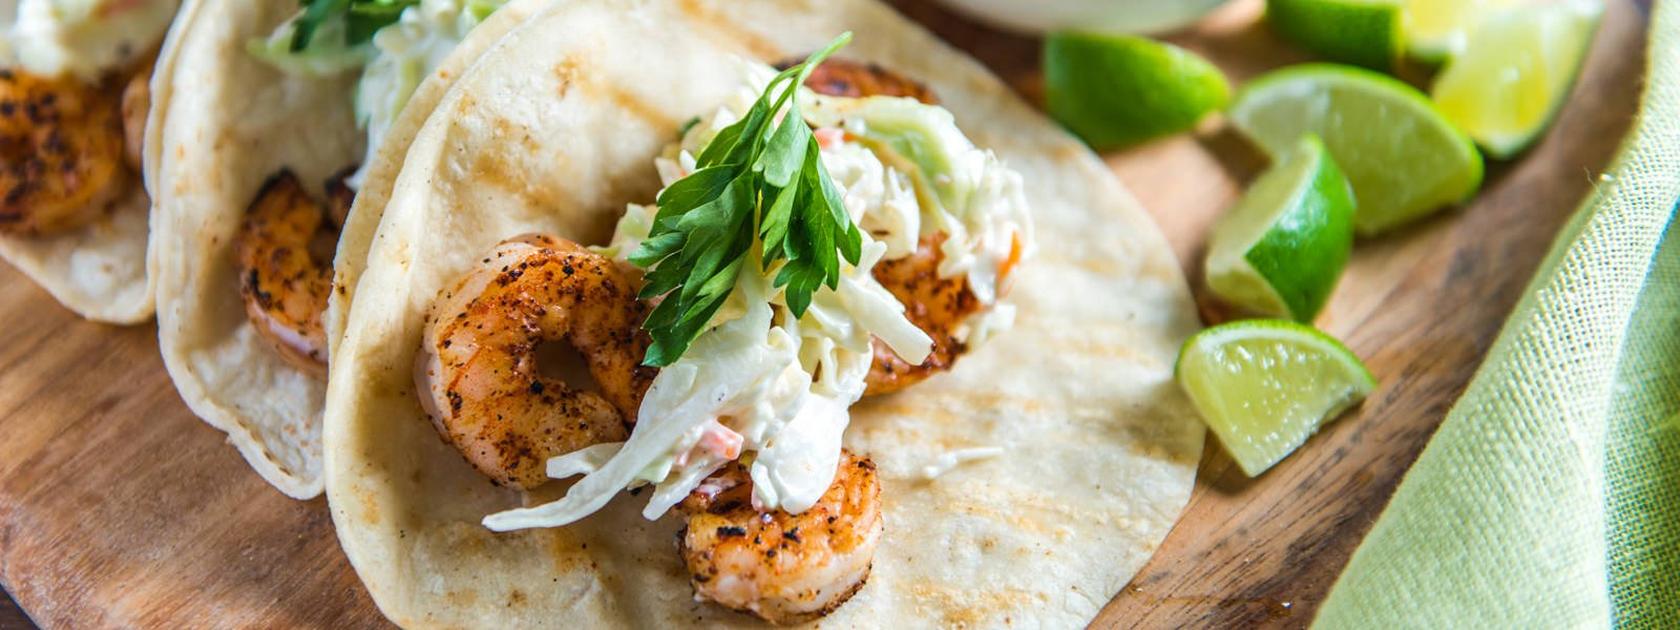 WR_0116_Grilled_Shrimp_Tacos_with_Garlic_Cilantro_Lime_Slaw_RE_HE